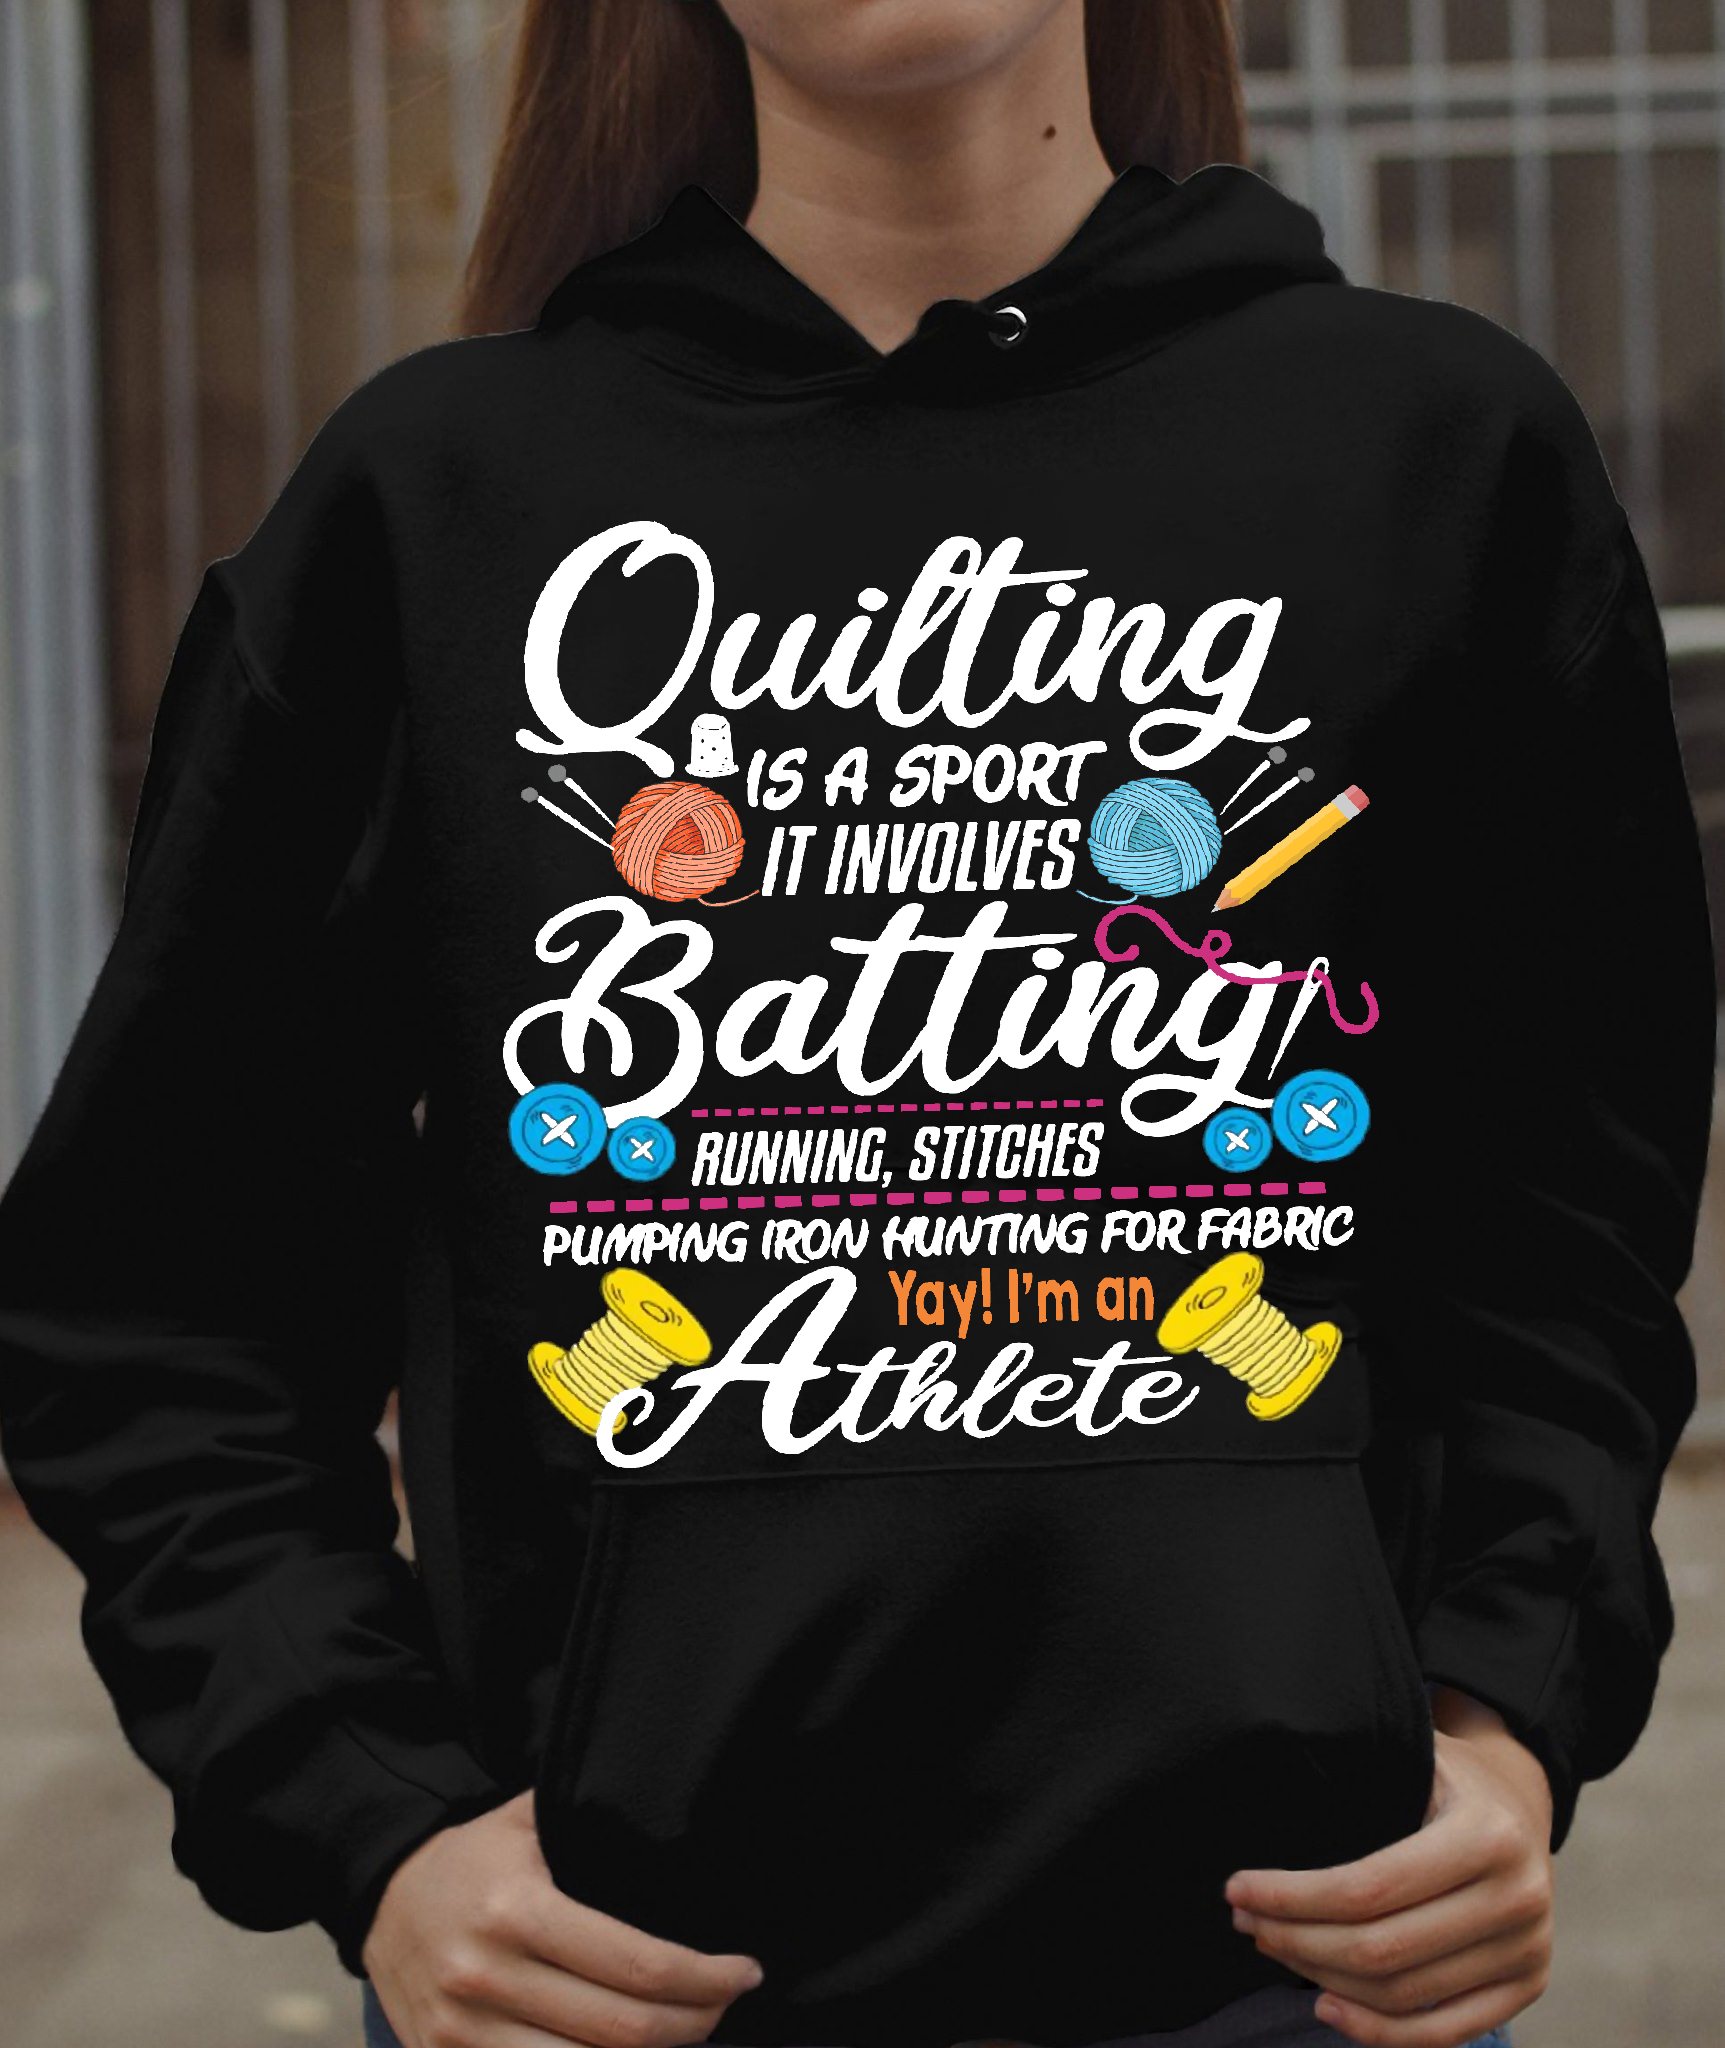 Quilting is a sport it involves batting running, stitches pumping iron hunting for fabric